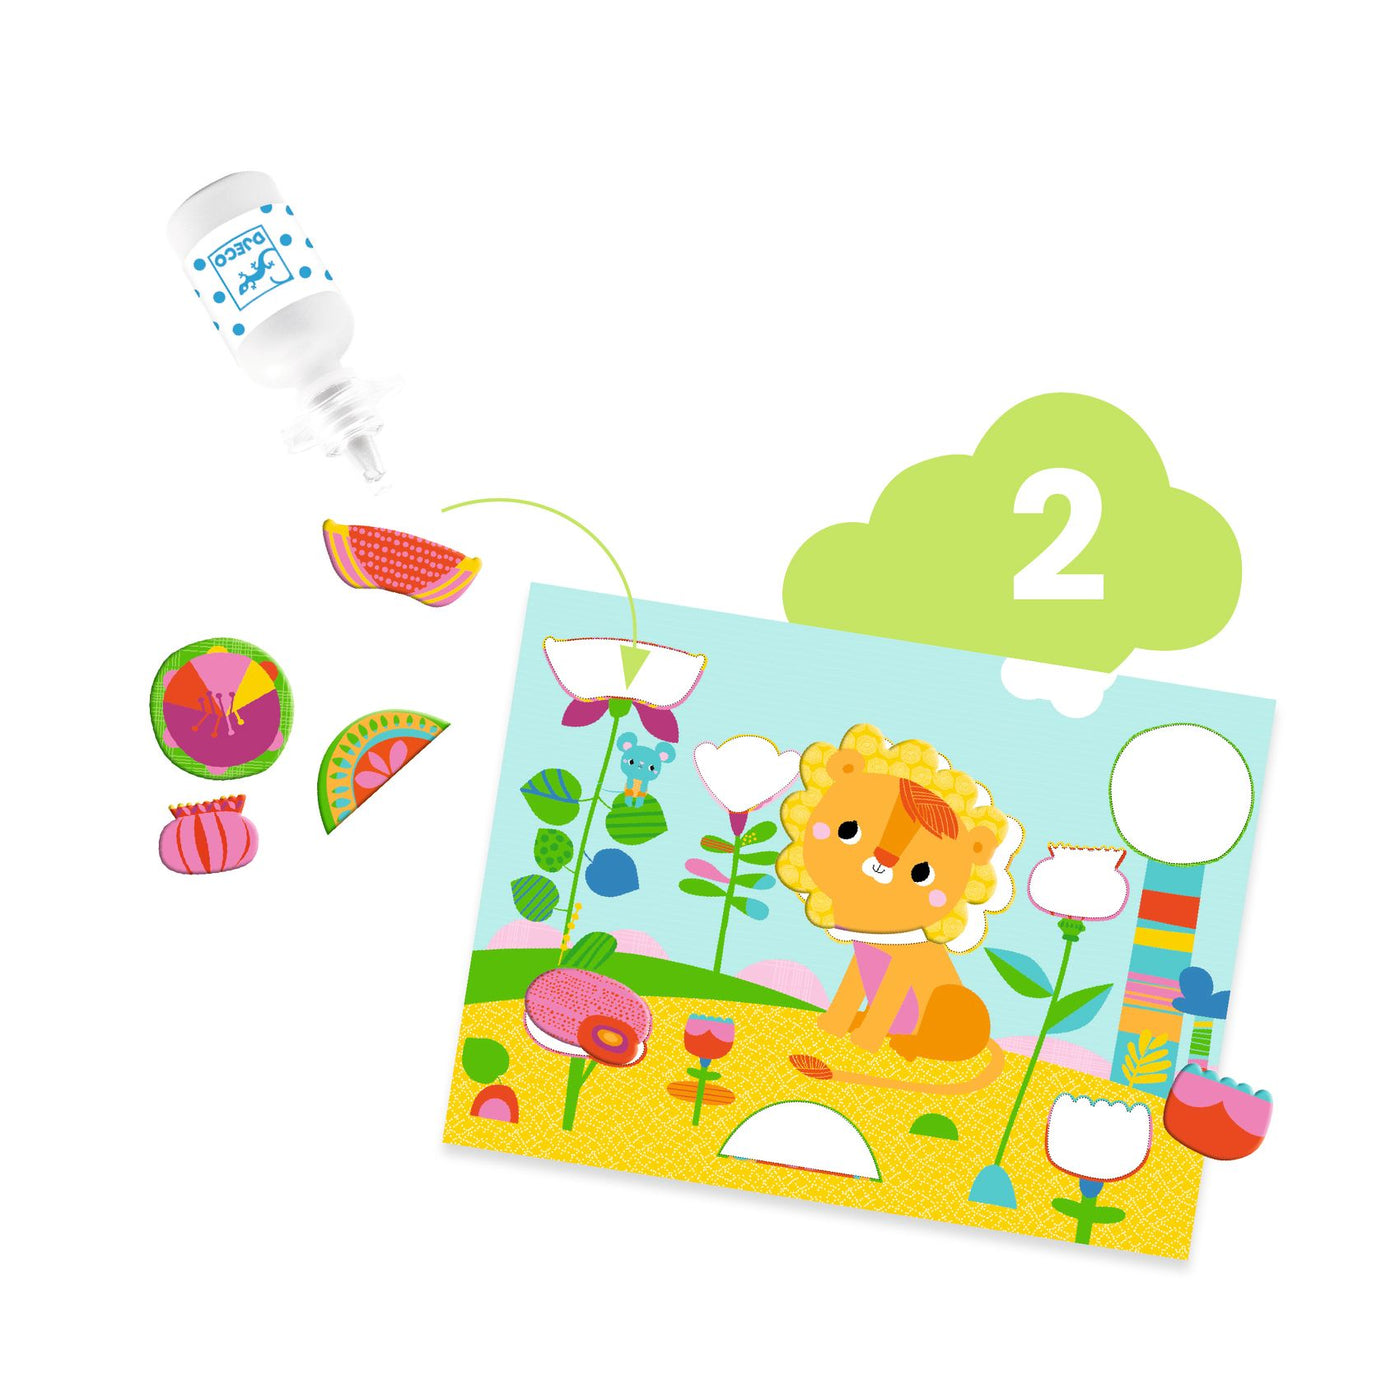 Djeco Multi-activity Kit - The mouse and his friends 18 mths +